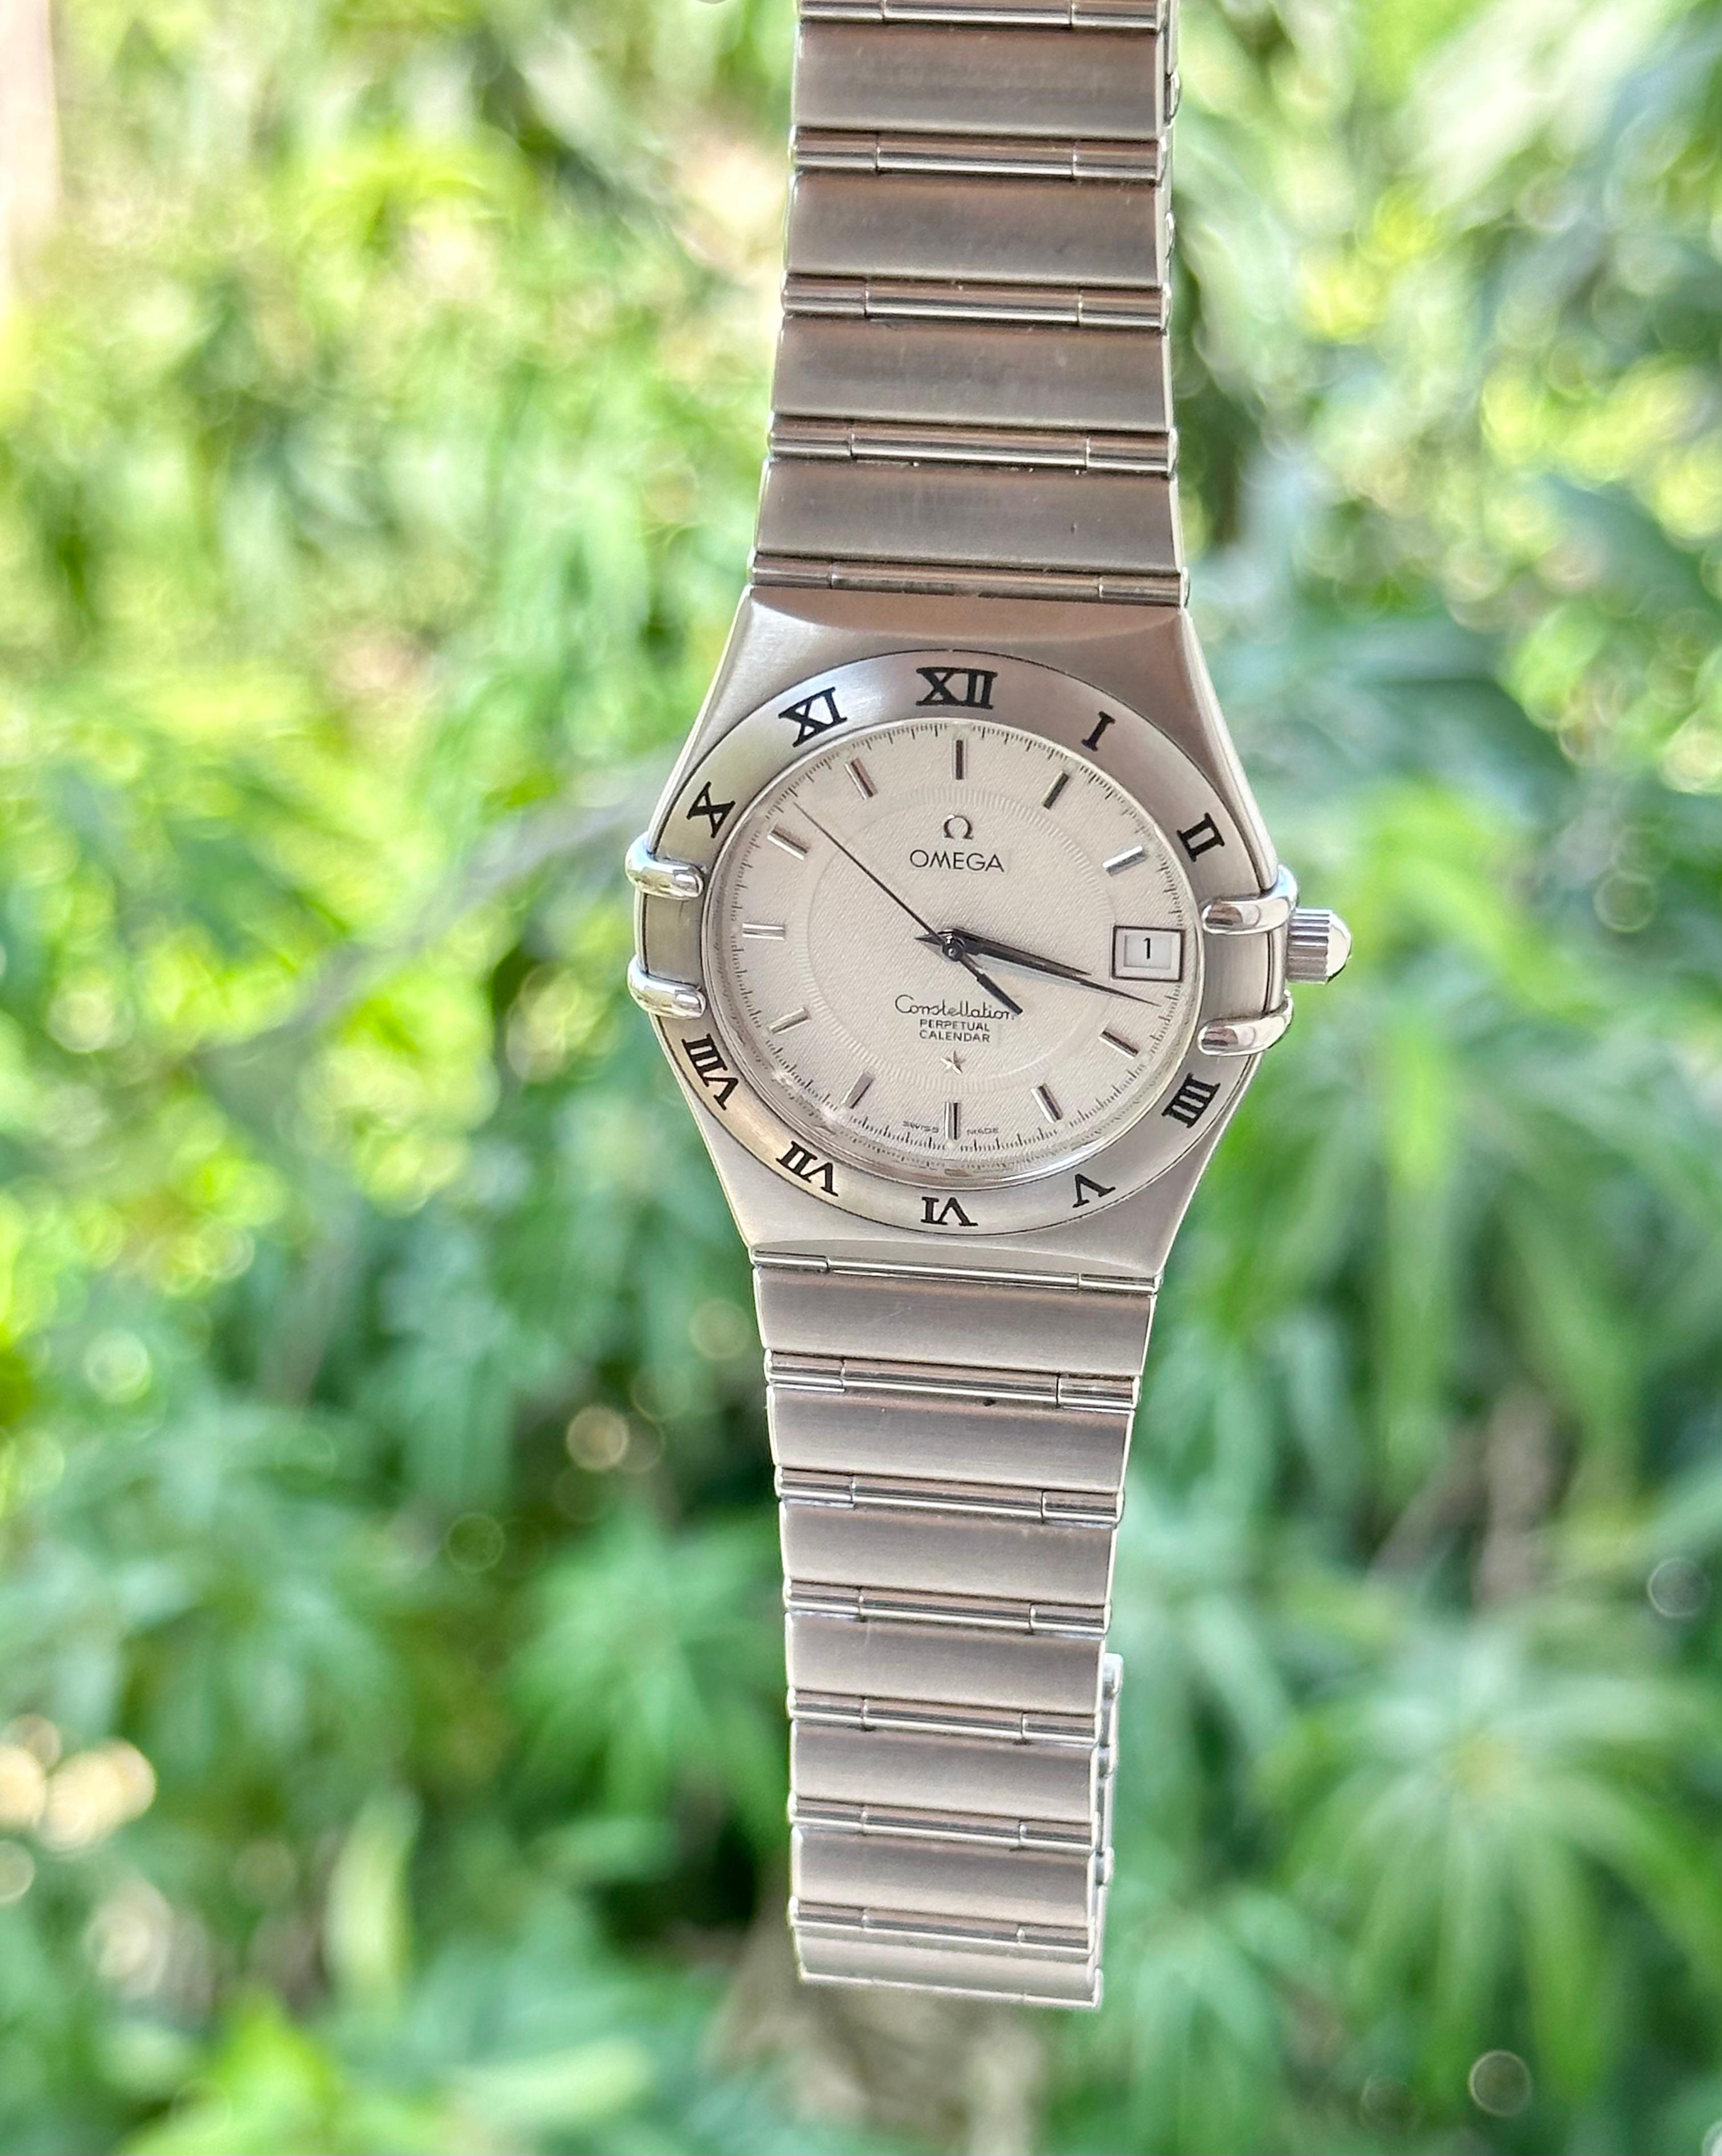 Omega Constellation Perpetual Calendar Serviced Watch  In Good Condition For Sale In Toronto, CA